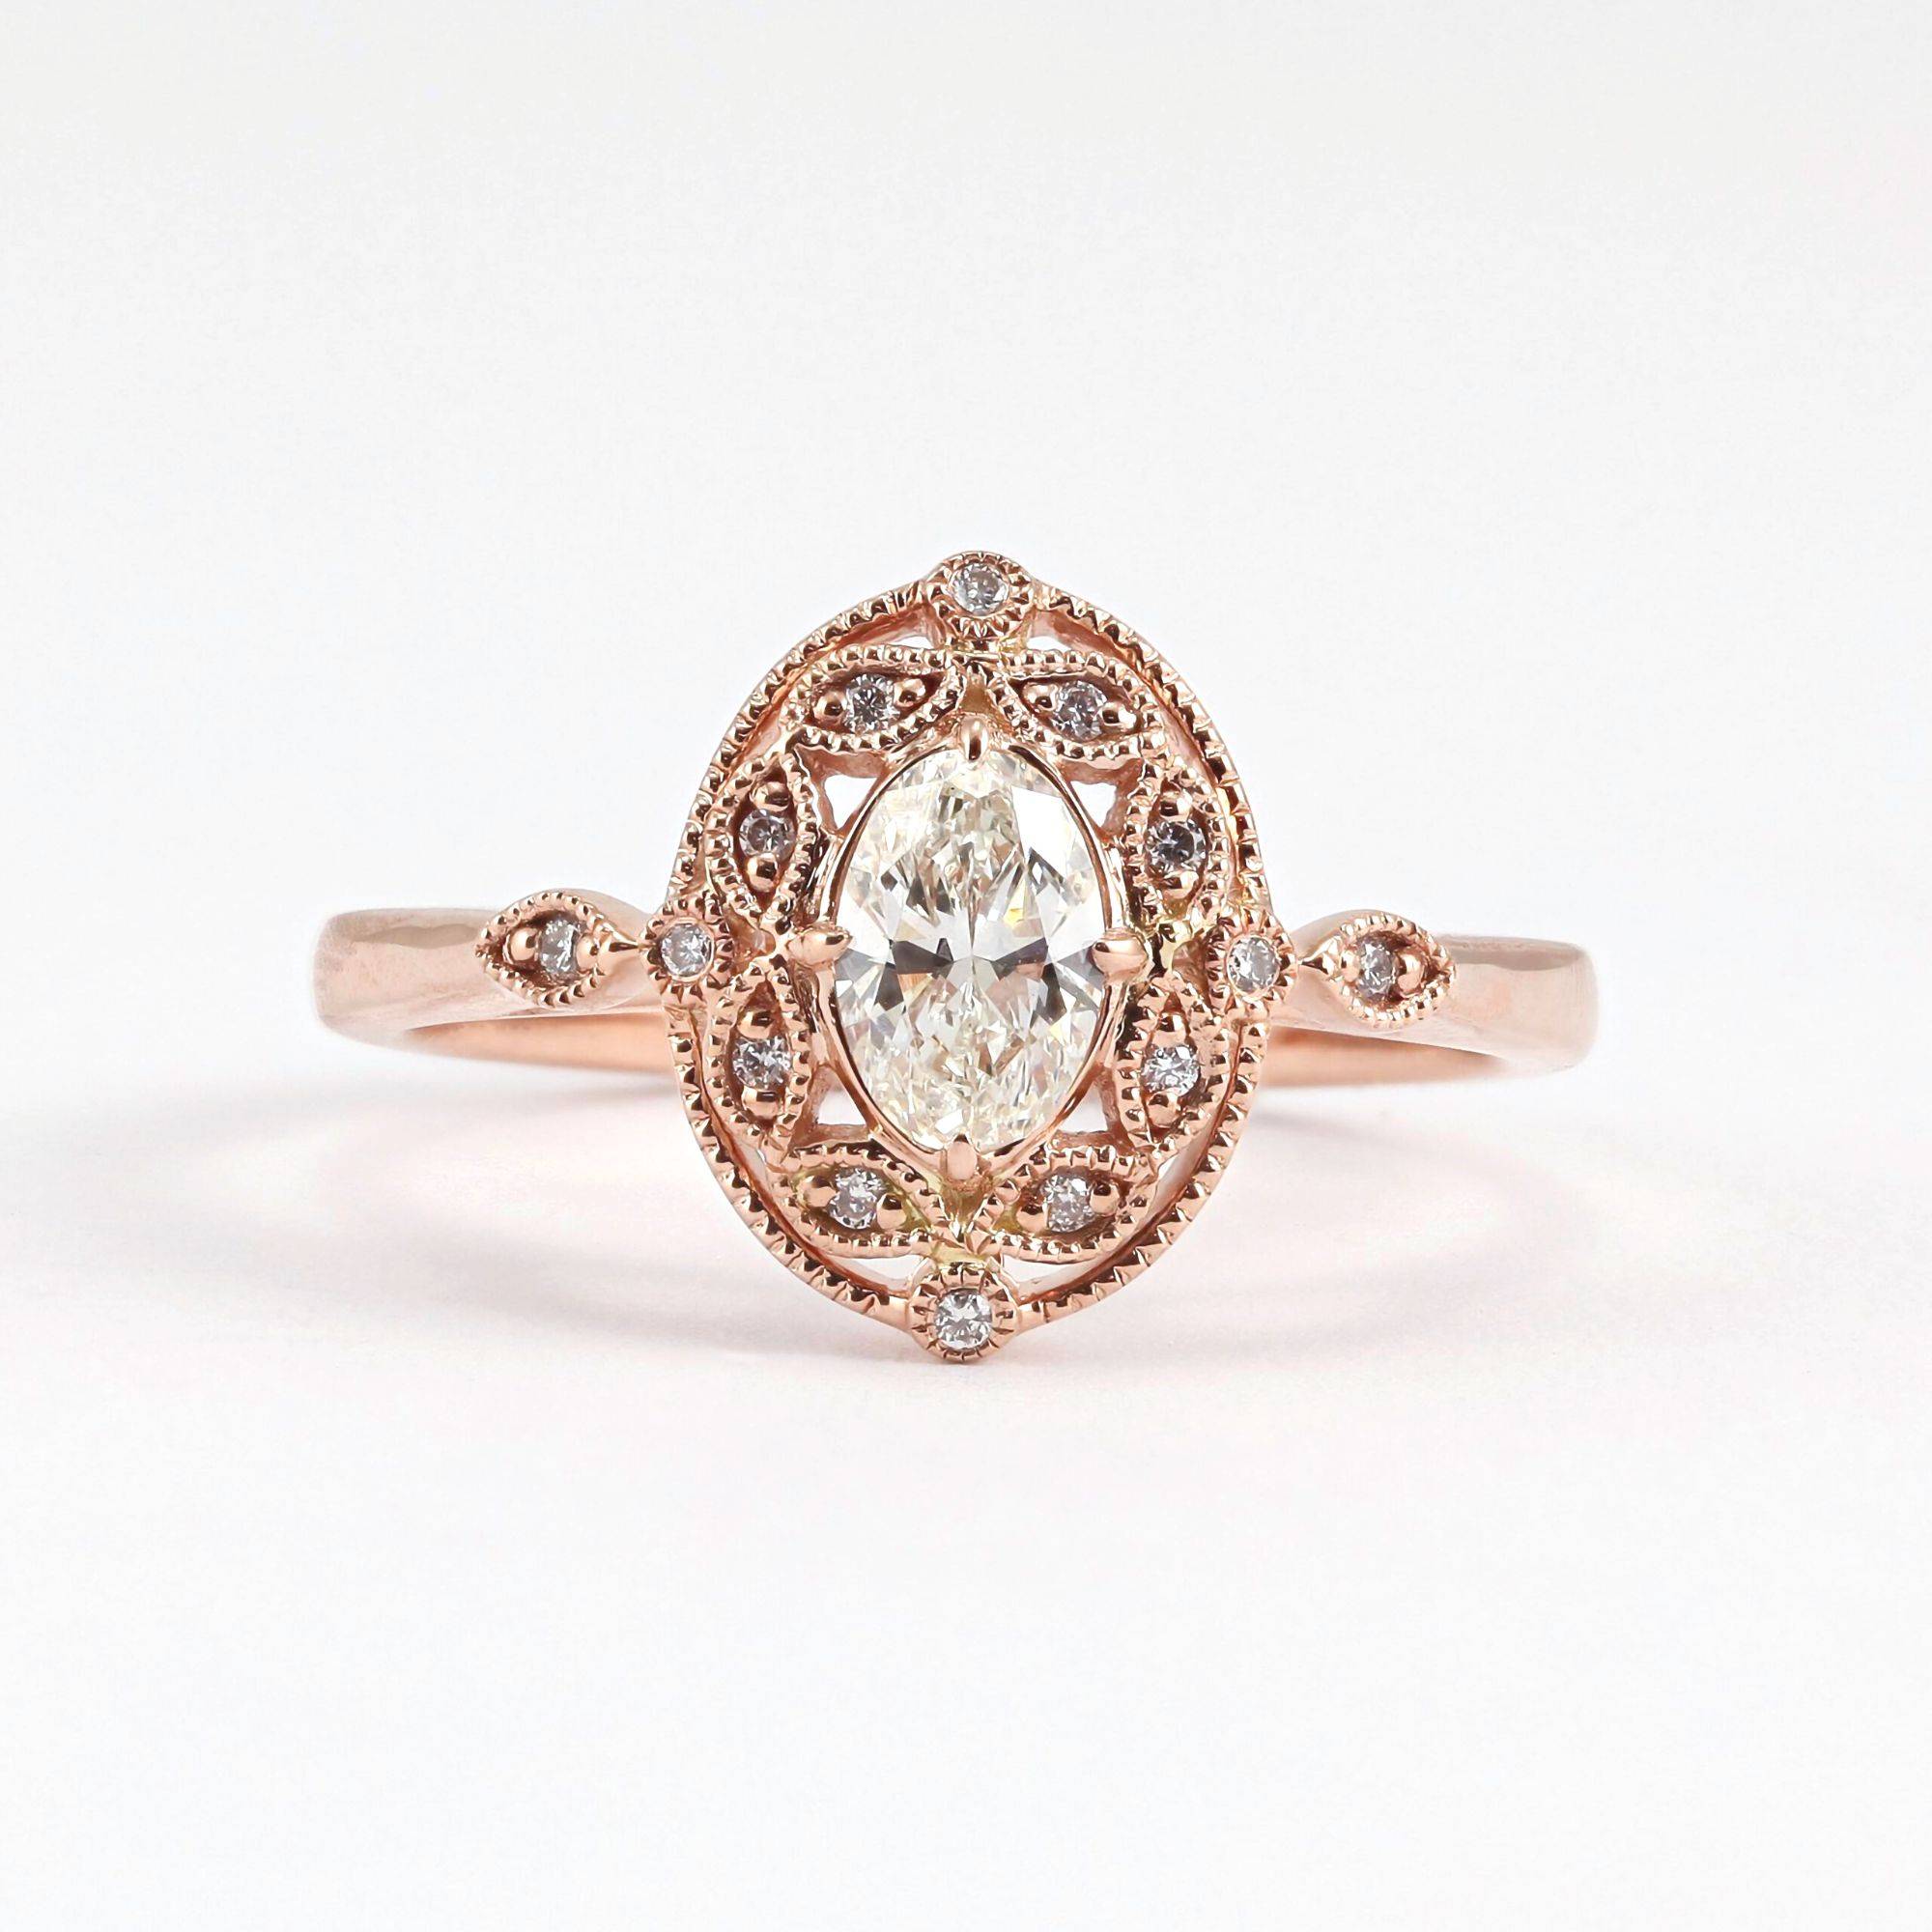 14K rose gold oval diamond engagement ring with milgrain and diamond halo